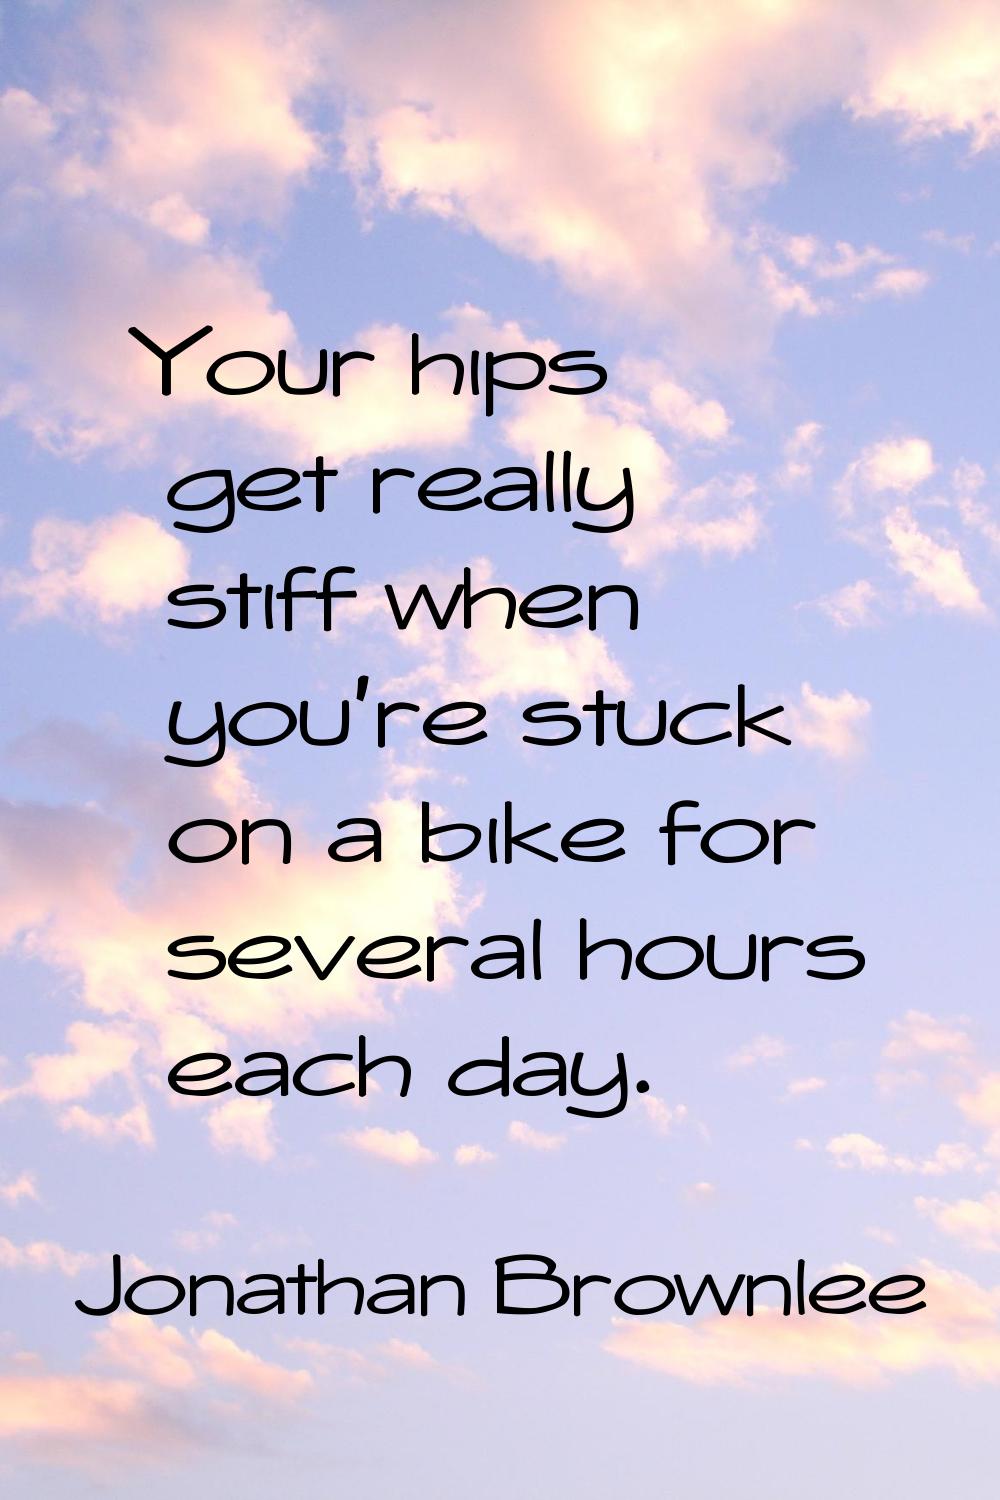 Your hips get really stiff when you're stuck on a bike for several hours each day.